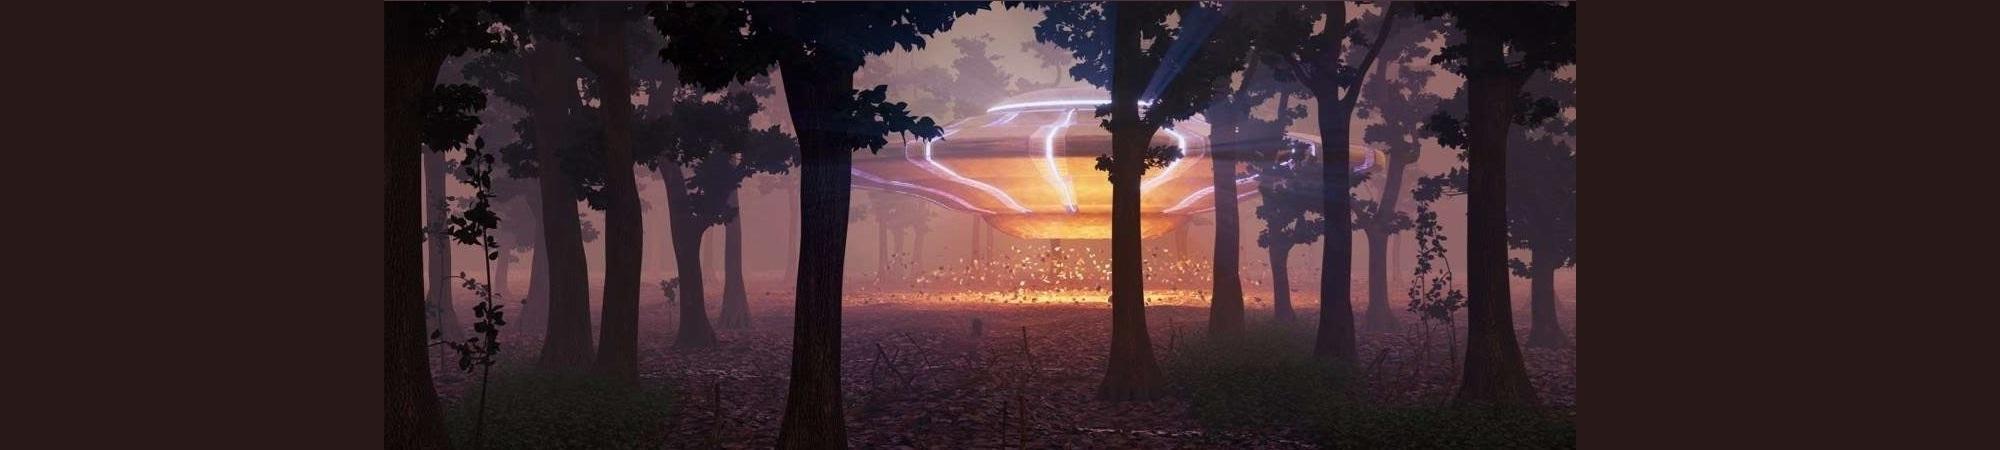 Glowing golden UFO in woods at night